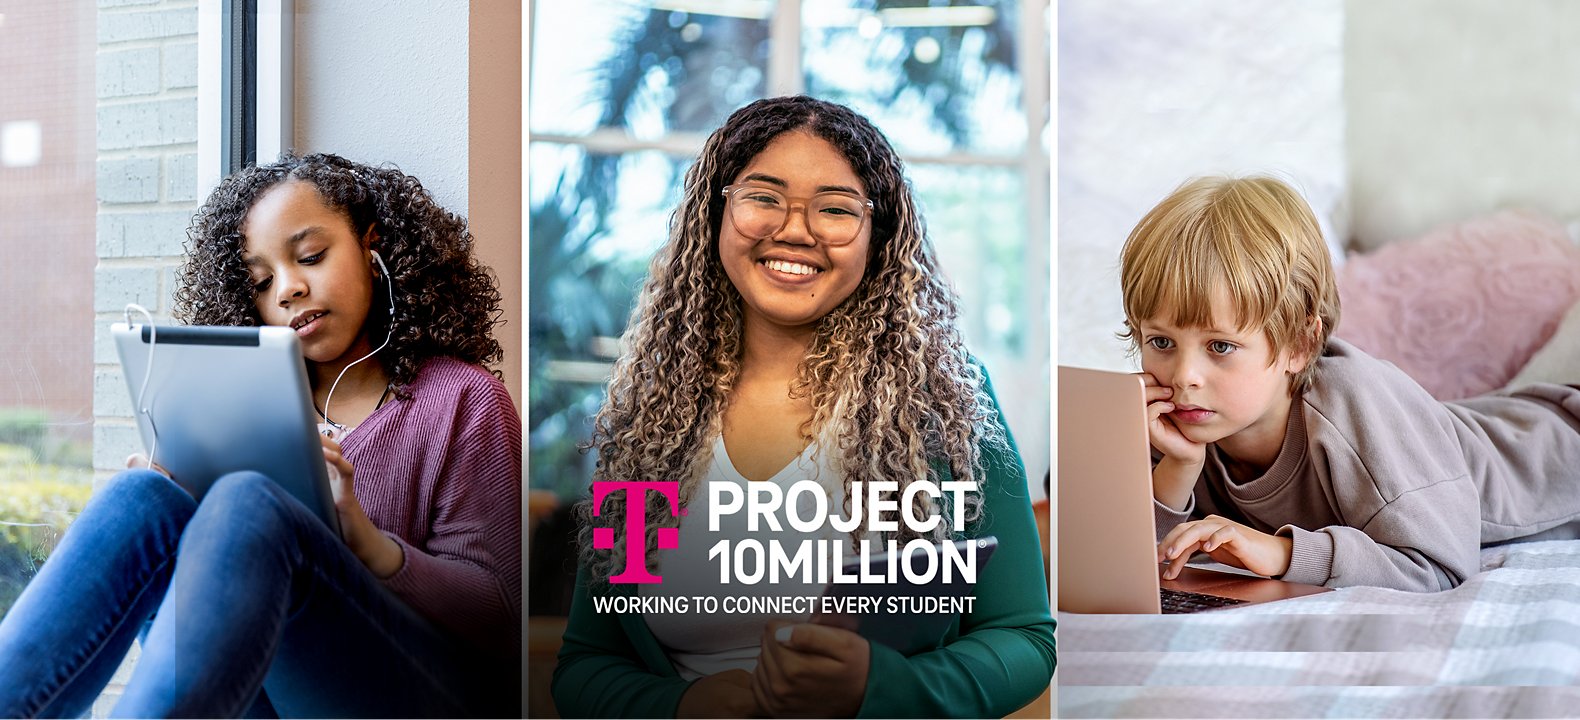 Free Internet for Students: Project 10Million | T-Mobile